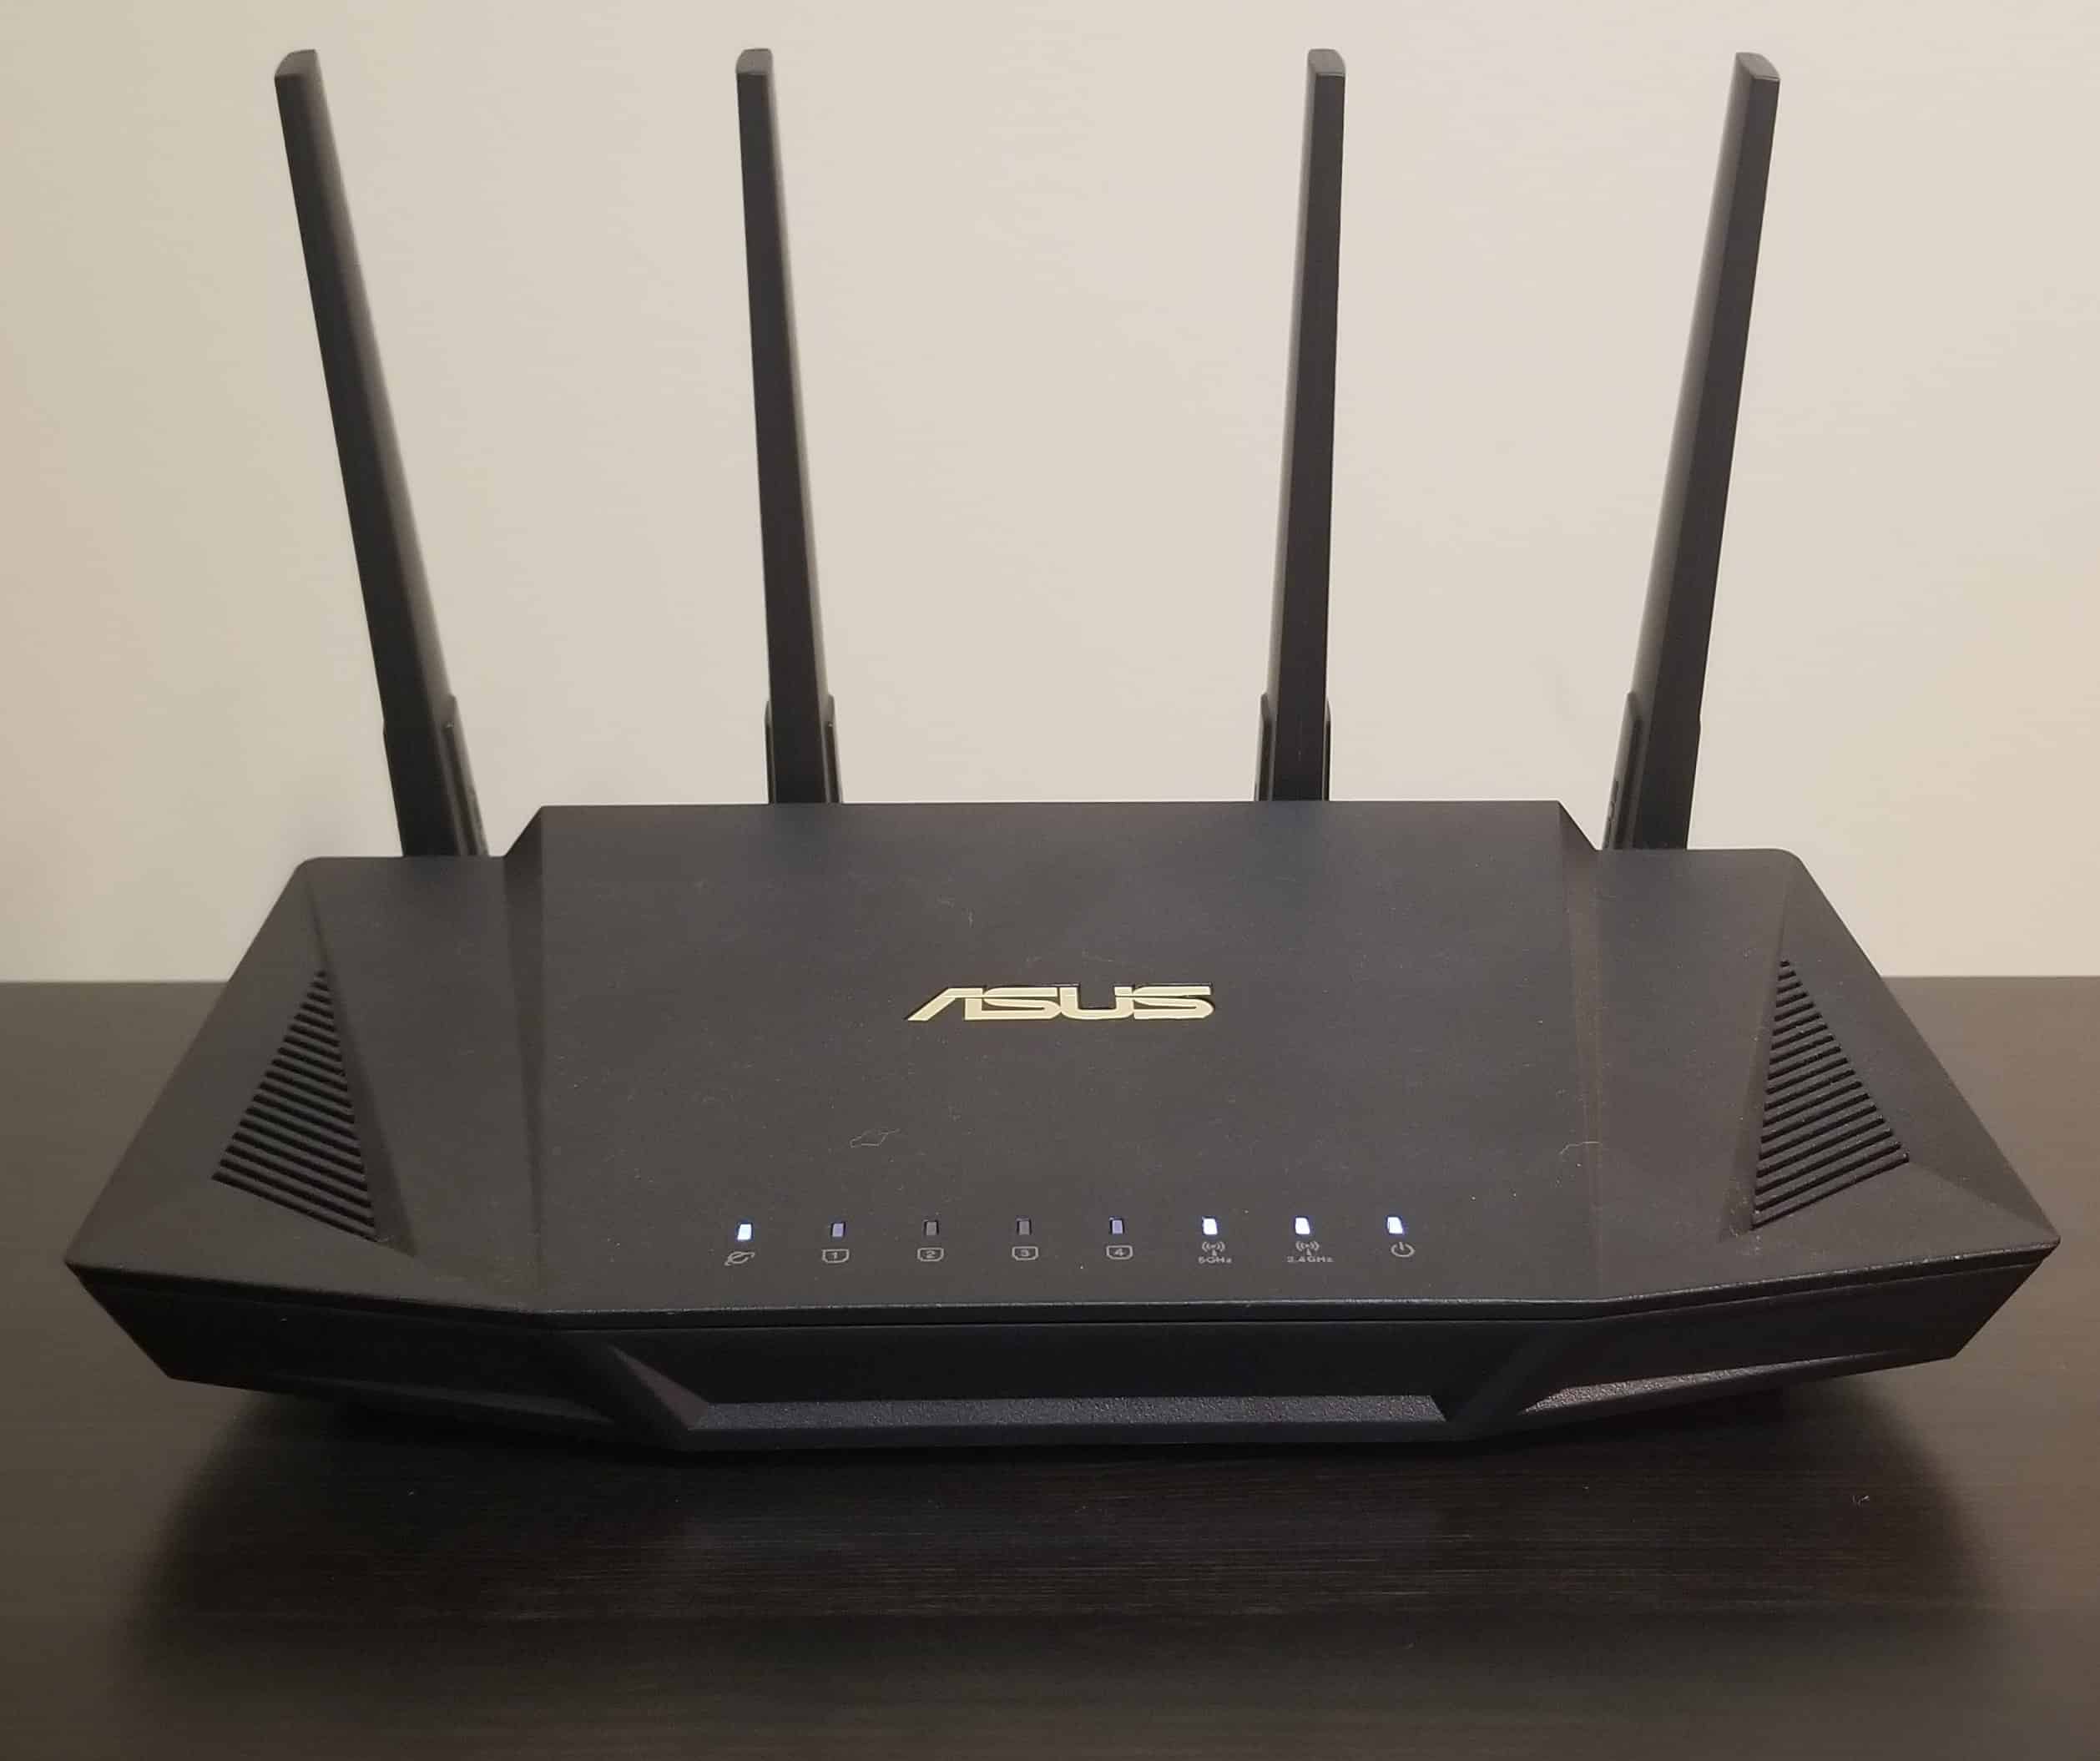 Do Routers Make A Difference? Here’s the truth!